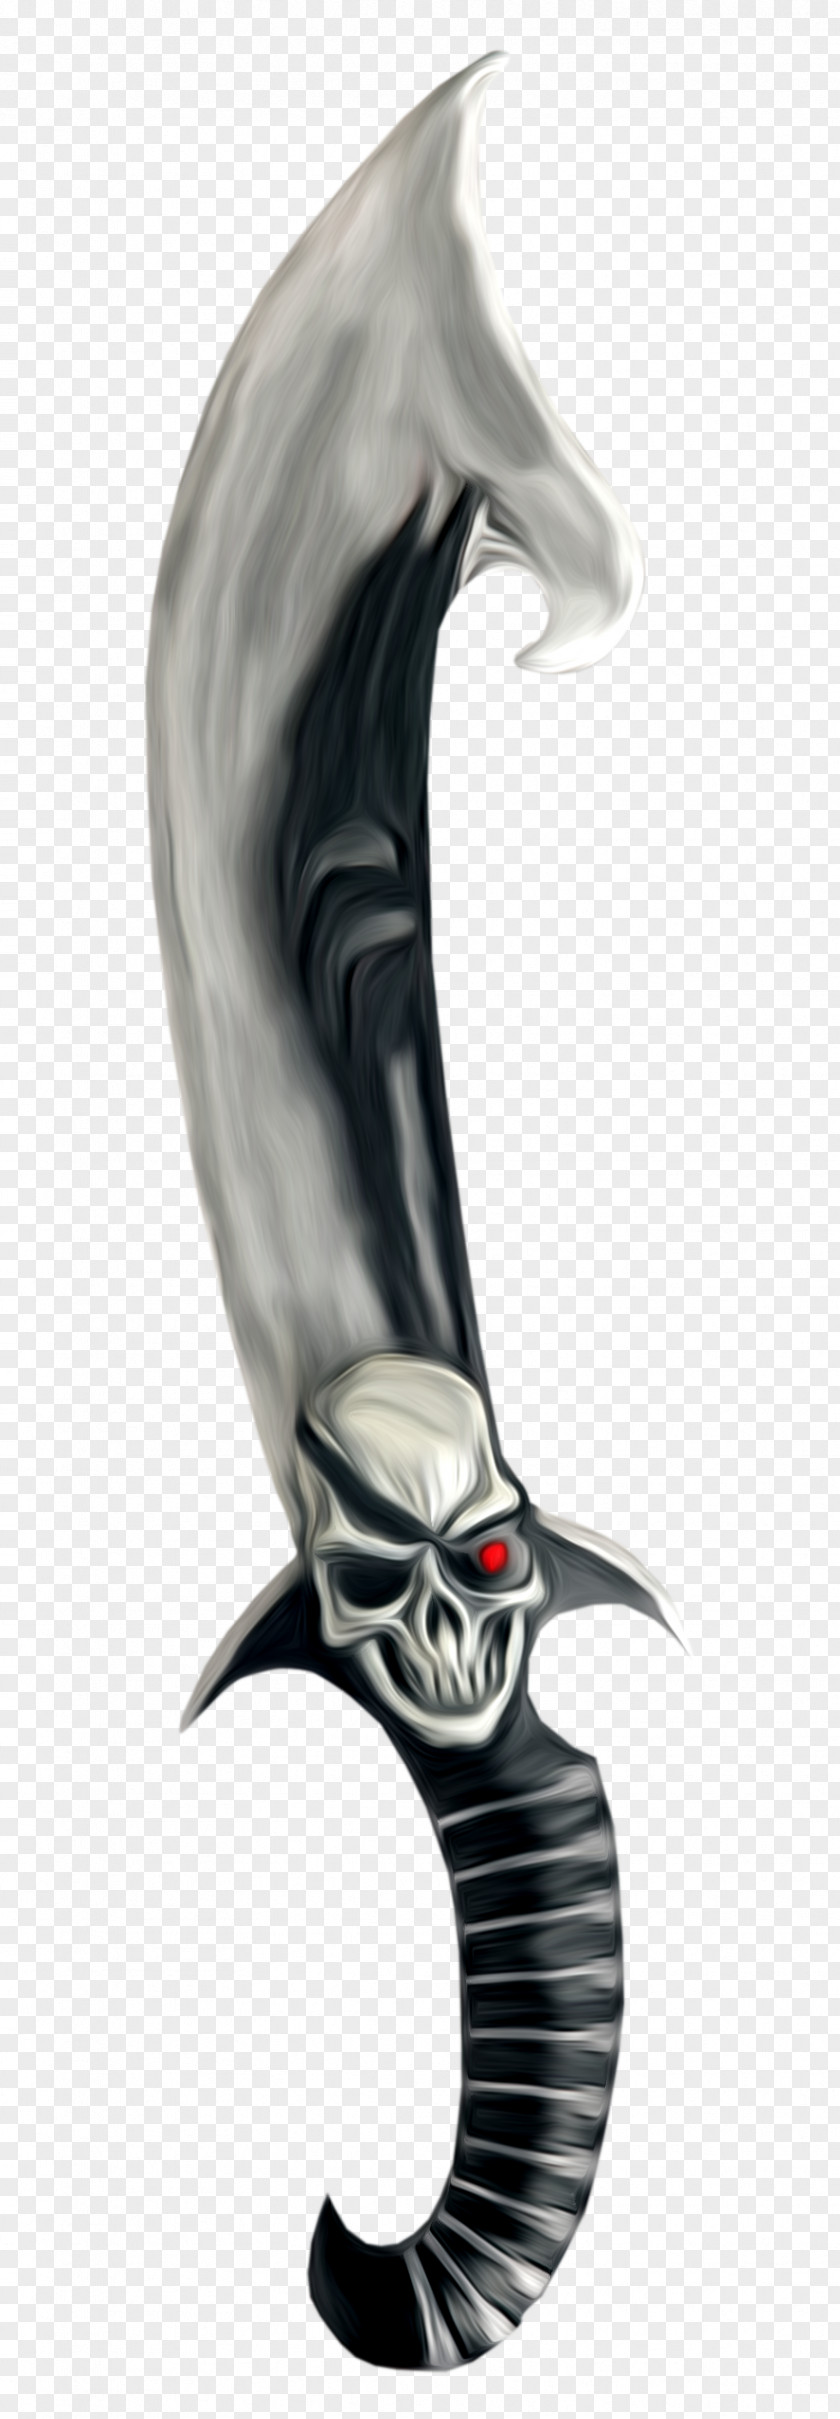 Dagger Knife Piracy Sword Weapon PNG